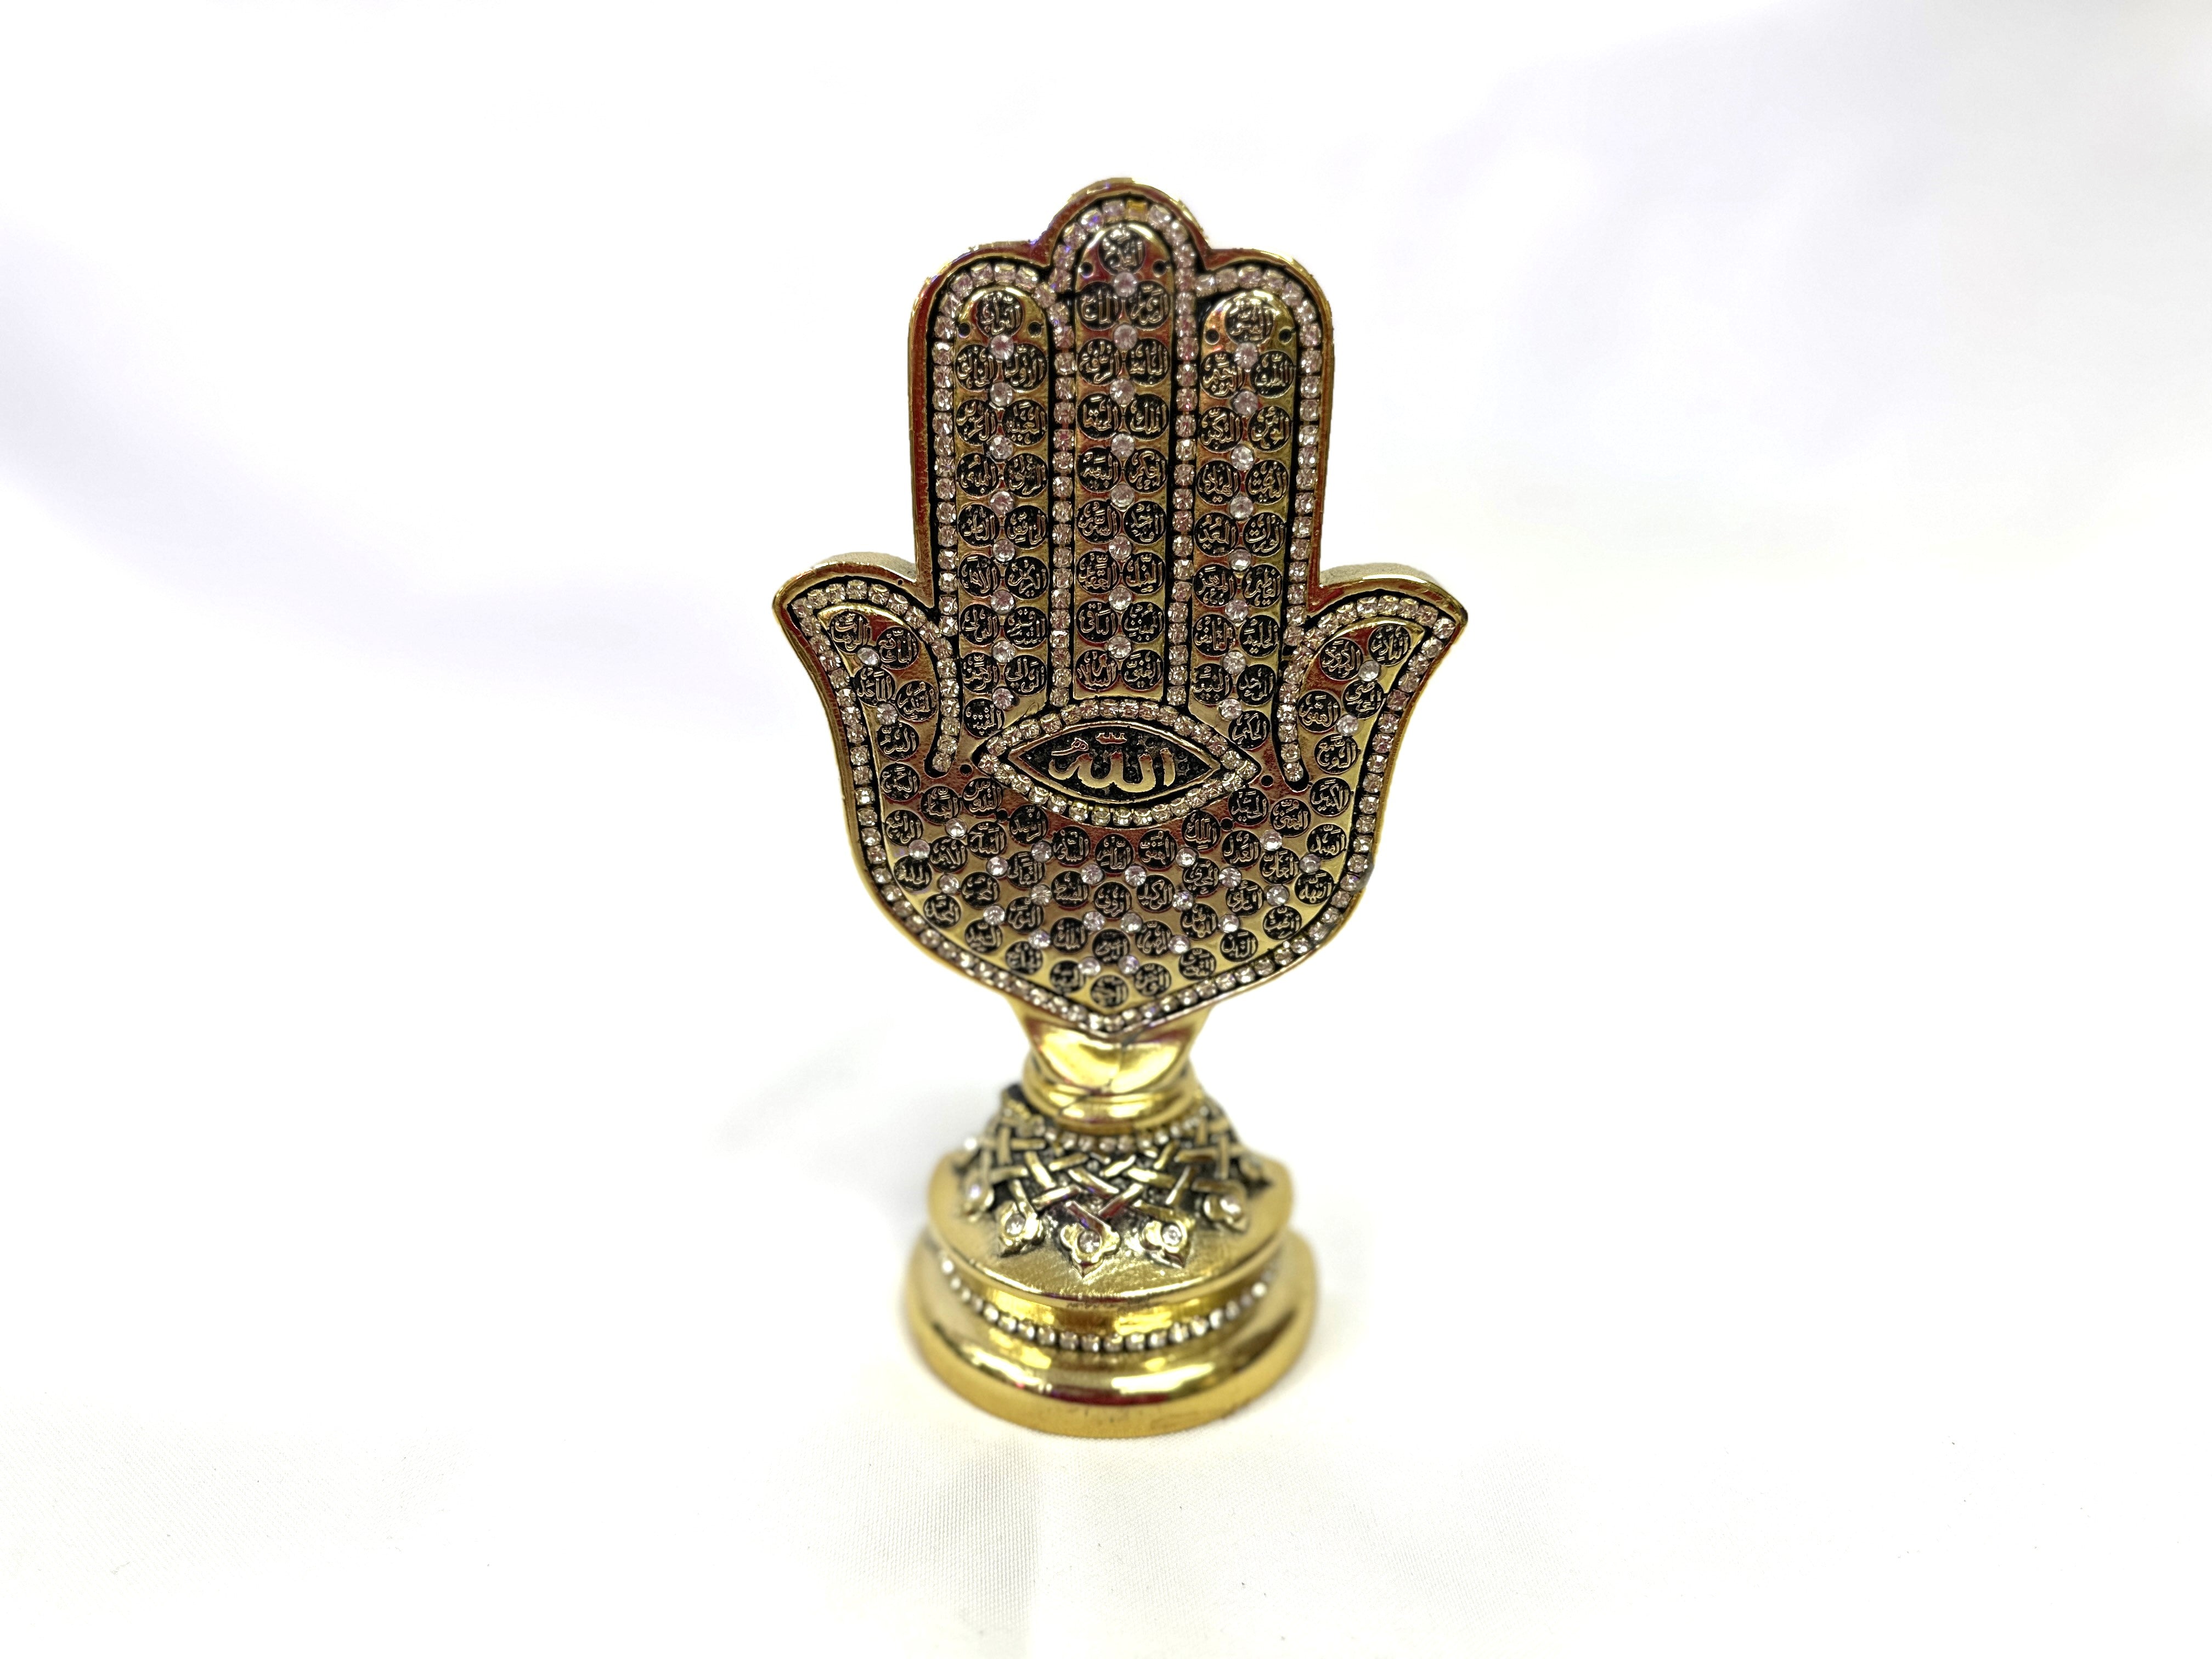 Islamic stylish gold with shiny crystal decoration item for your home